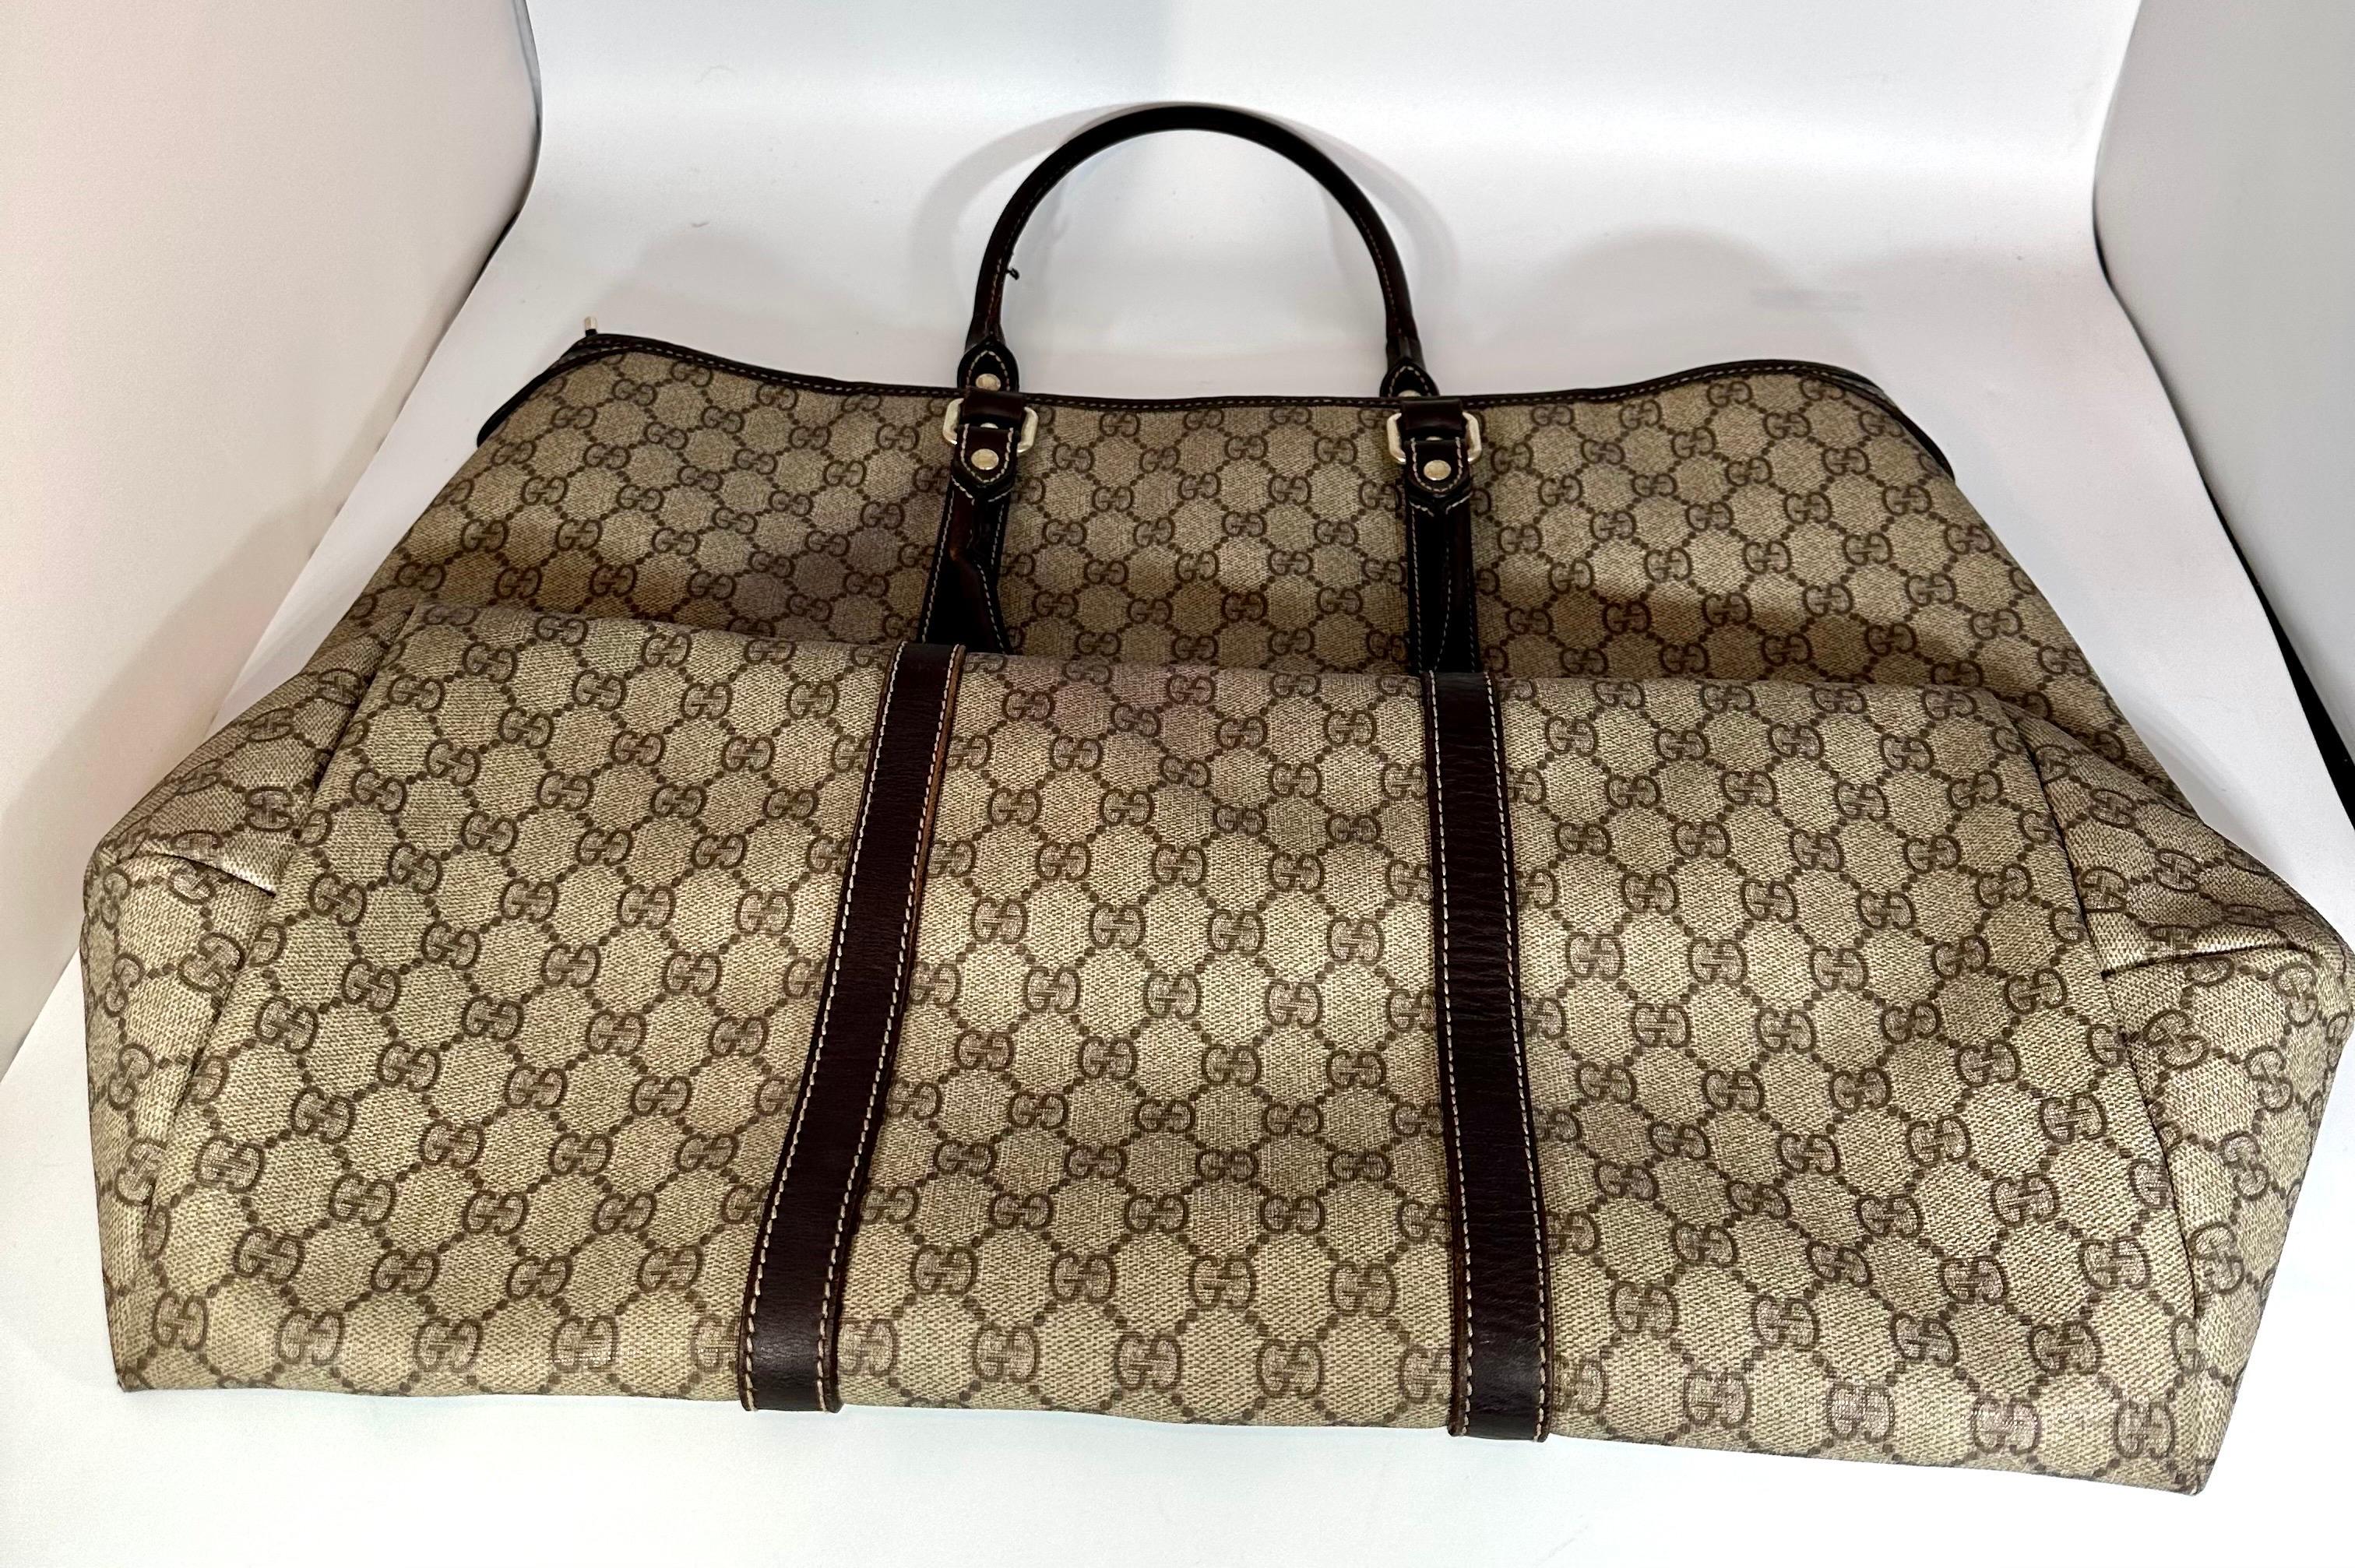 Gucci XL Monogram Tote Brown Coated Canvas Weekend/Travel Bag
Gucci Plus Vintage Tan Monogram Canvas Large Tote Shoulder Bag 
This is an Authentic Vintage Gucci Plus Webby large Tote
Vintage are in!!! They are hard to find and it is in very good